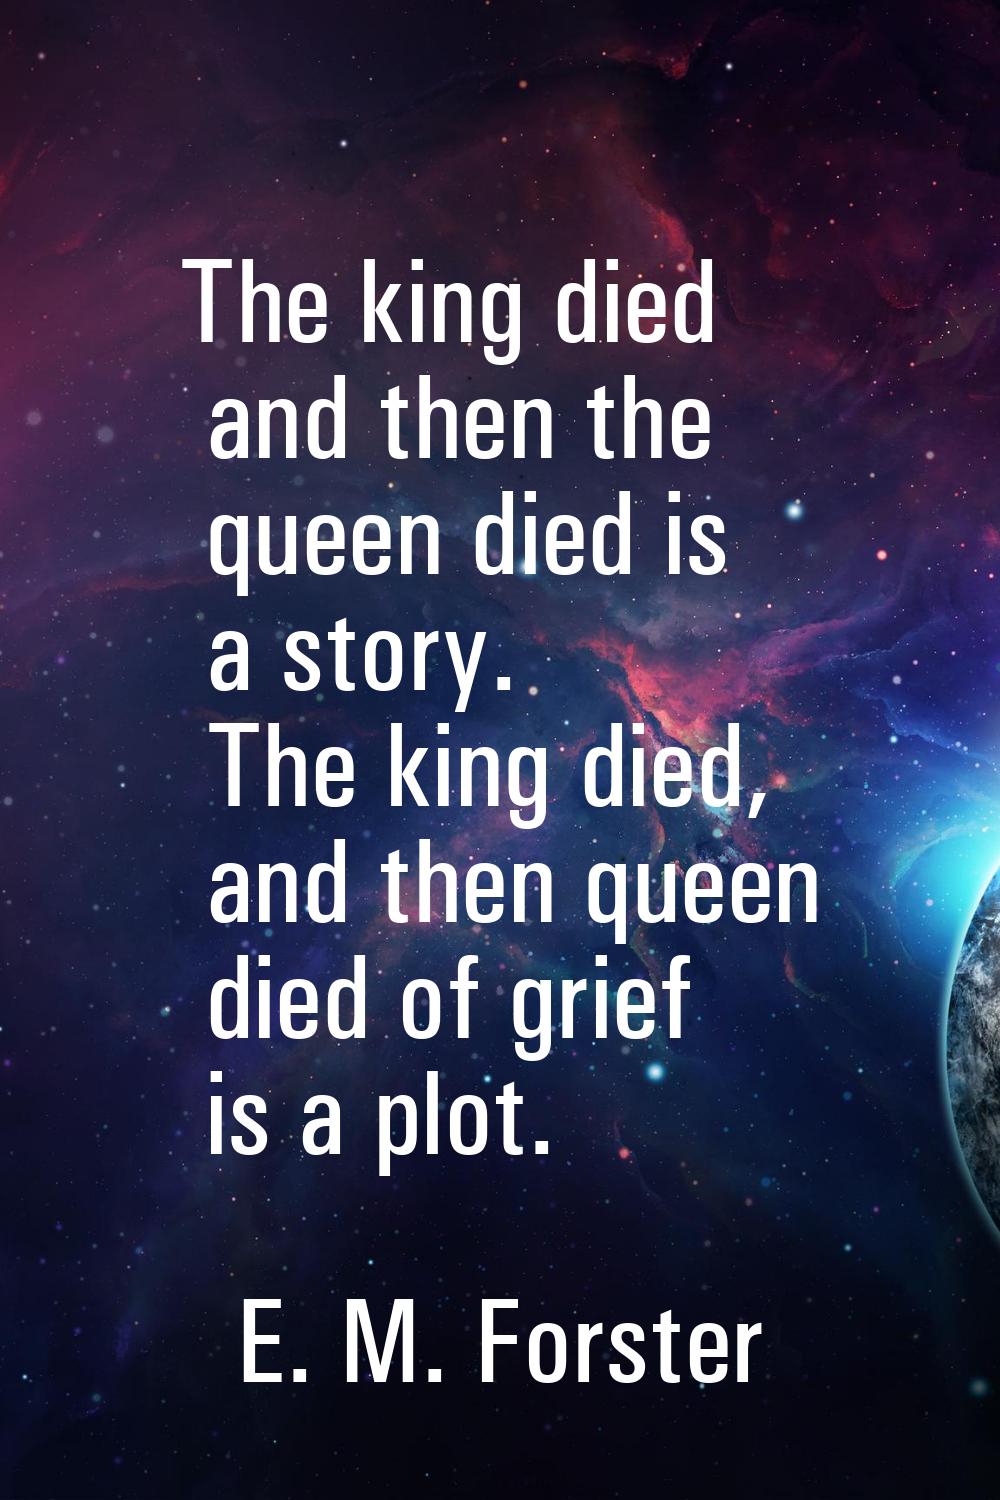 The king died and then the queen died is a story. The king died, and then queen died of grief is a 